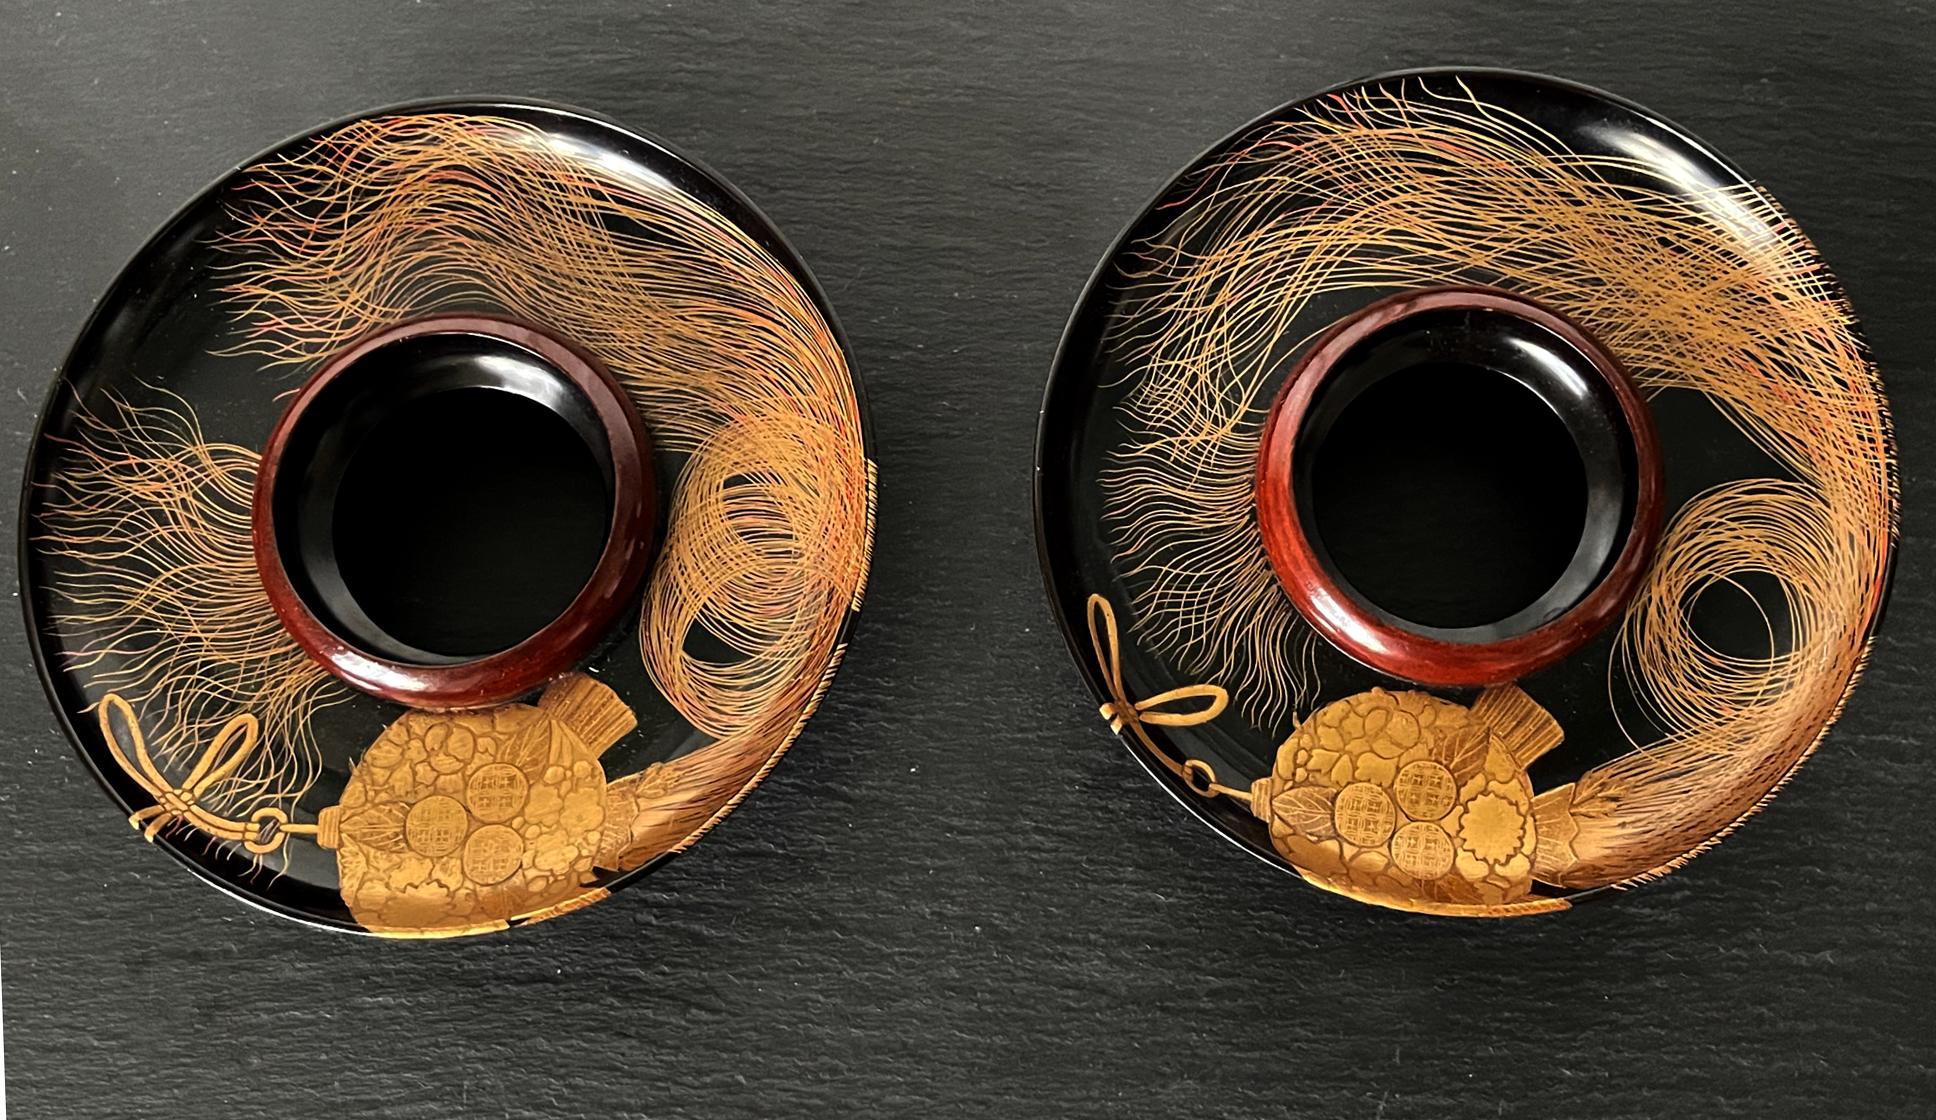 A pair of Japanese lacquered wood cup stands with Maki-e decoration circa end of 19th century of Meiji period. These stands were used to present tea or sake cups at elaborate parties and therefore not for daily use. The surface of these pieces was